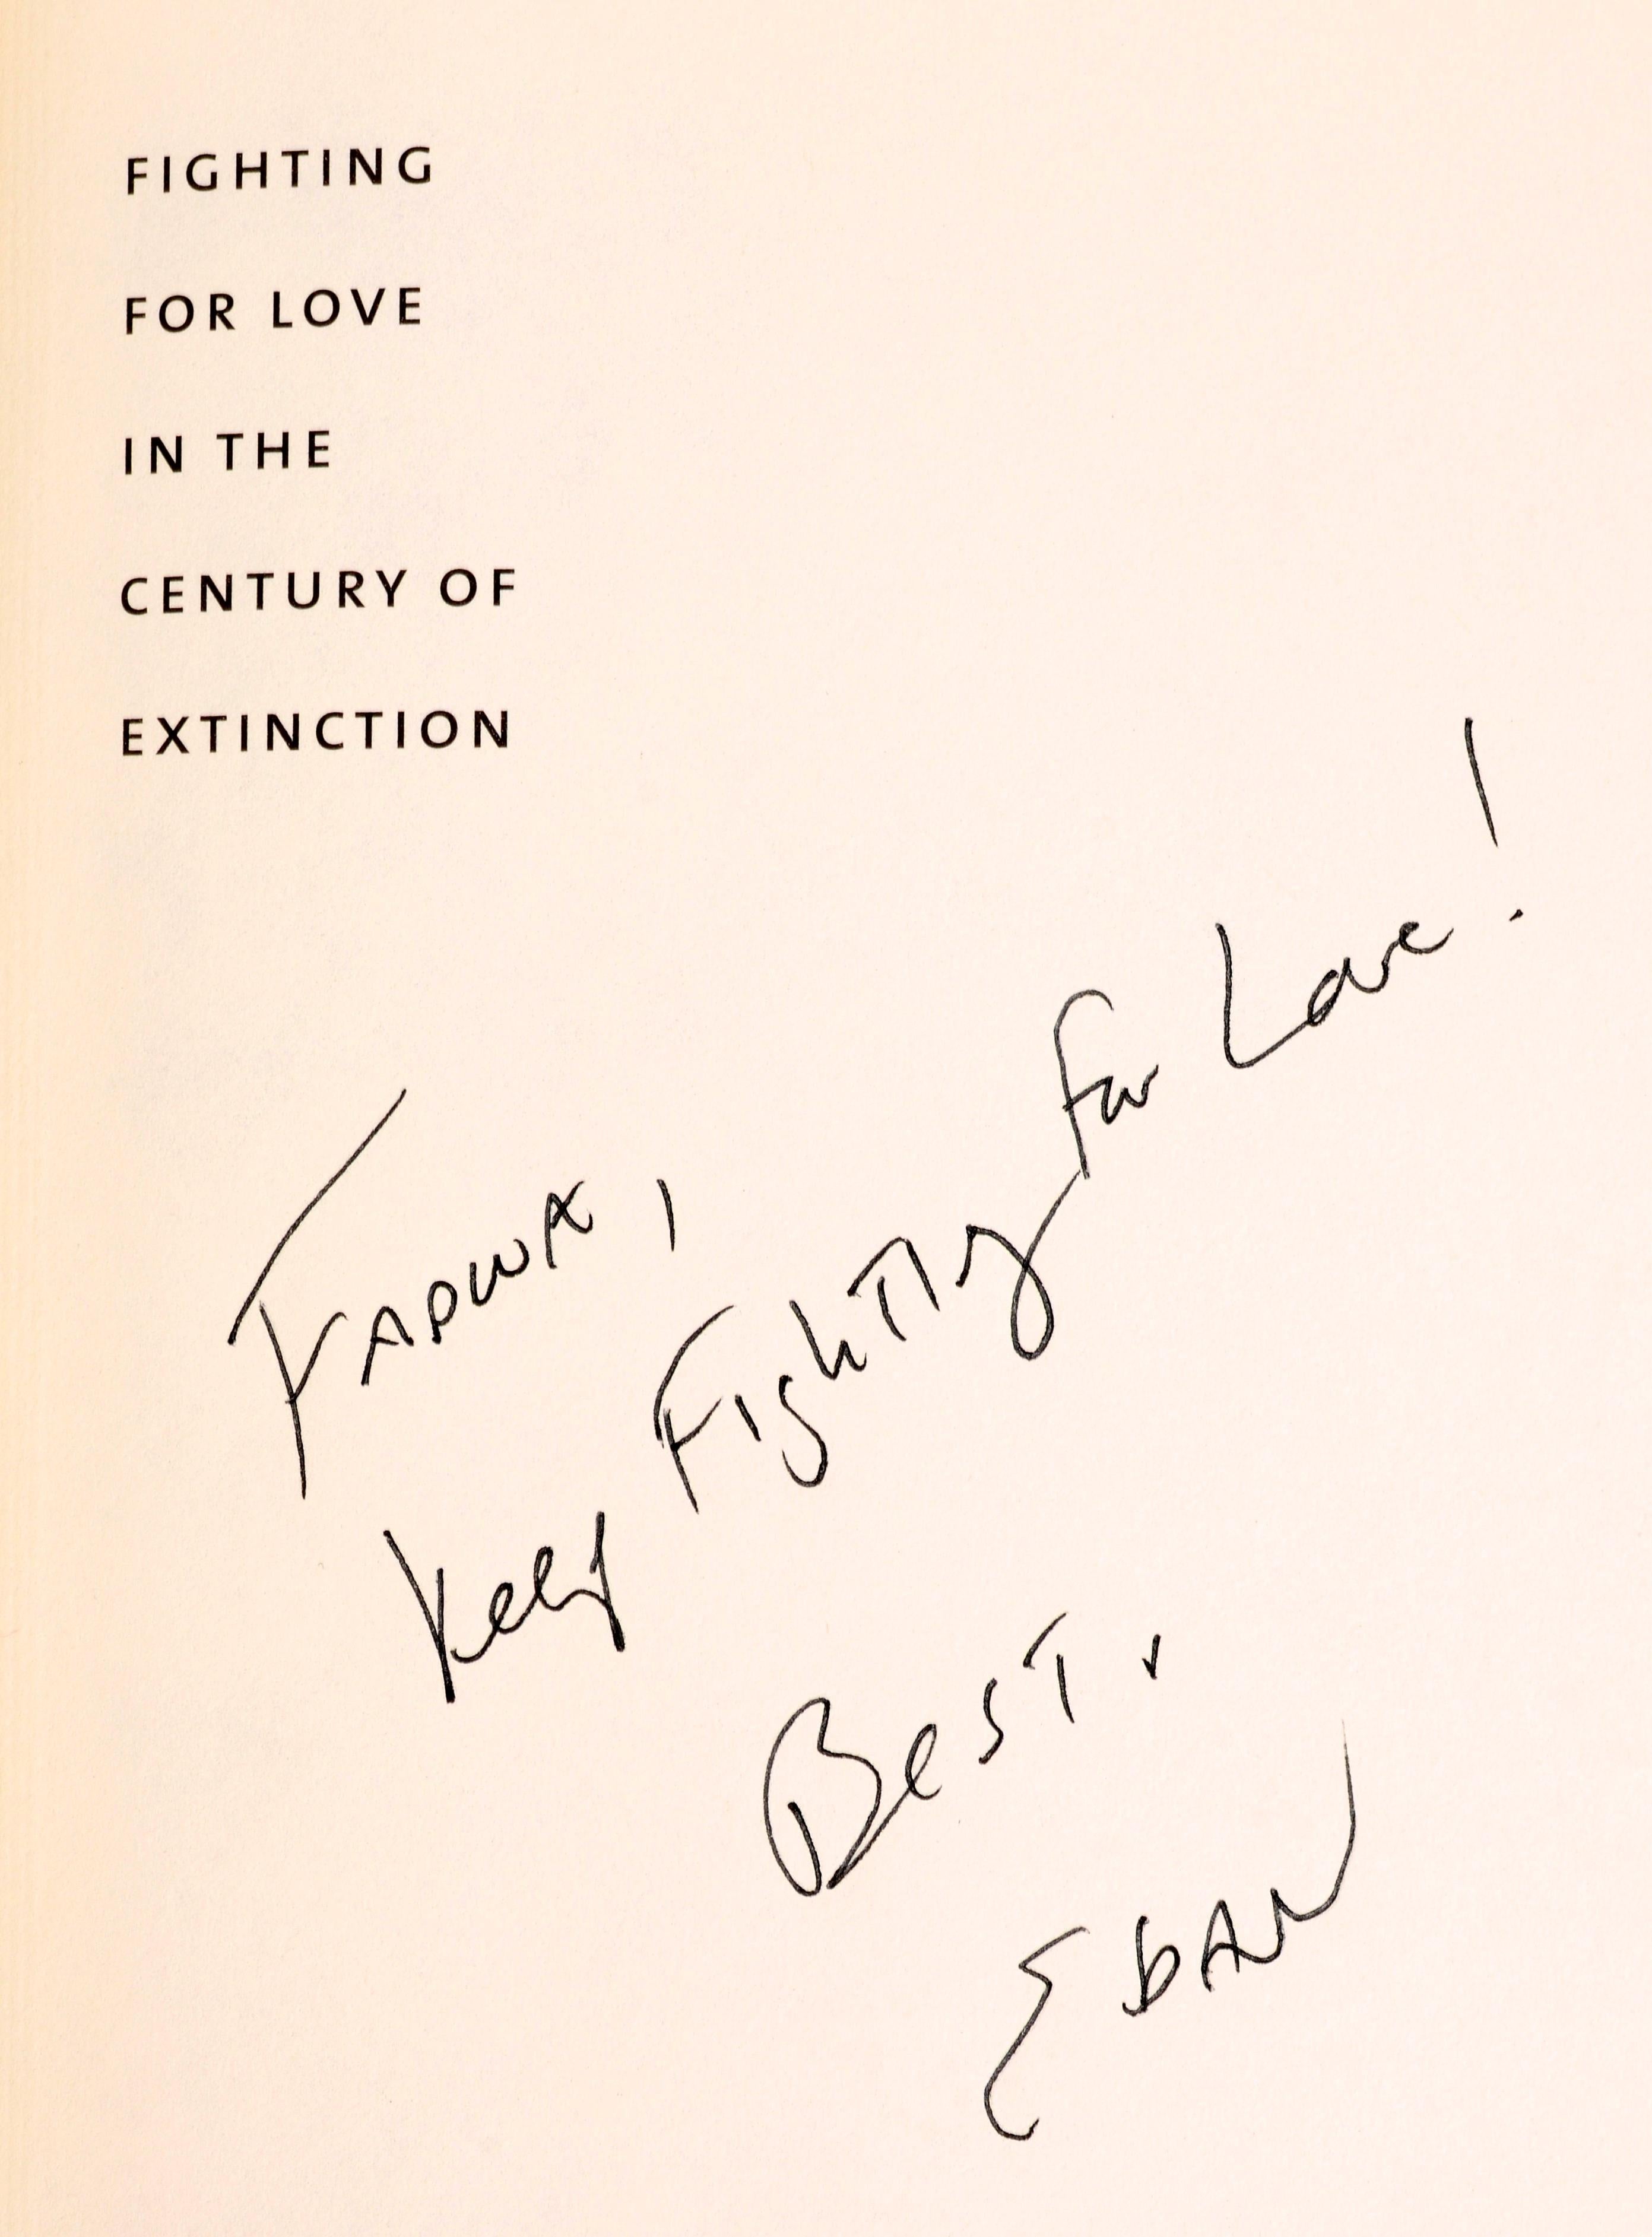 Fighting for Love in the Century of Extinction: How Passion and Politics Can Stop Global Warming by Eban Goodstein. Published by University Press of New England, 2007. 1st Ed hardcover with dust jacket. The central idea in Fighting for Love in the